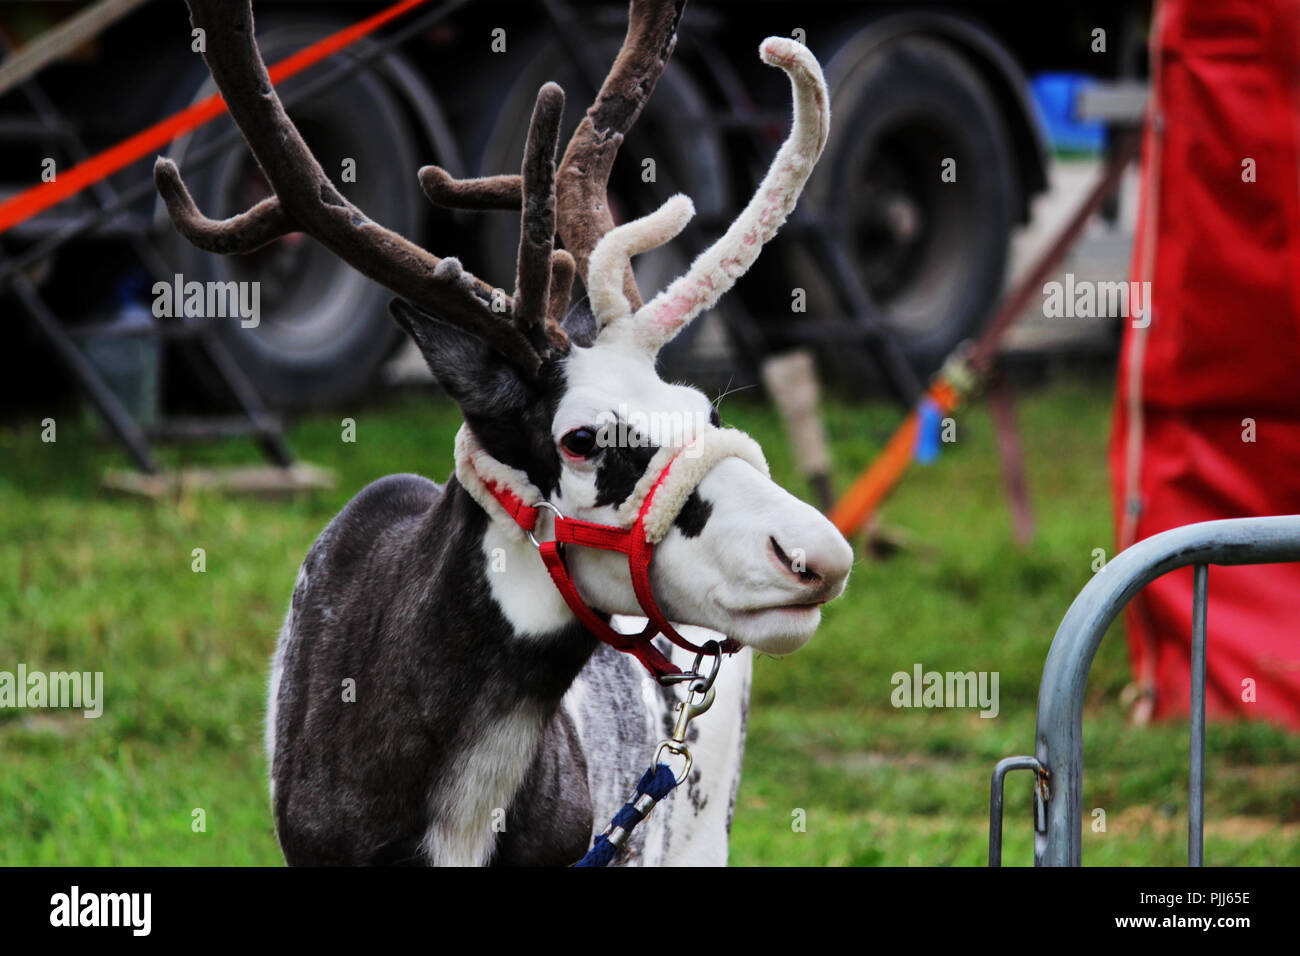 a circus reindeer Rangifer tarandus in a red bridle is tied next to a tent of a wandering circus set on a wasteland Stock Photo